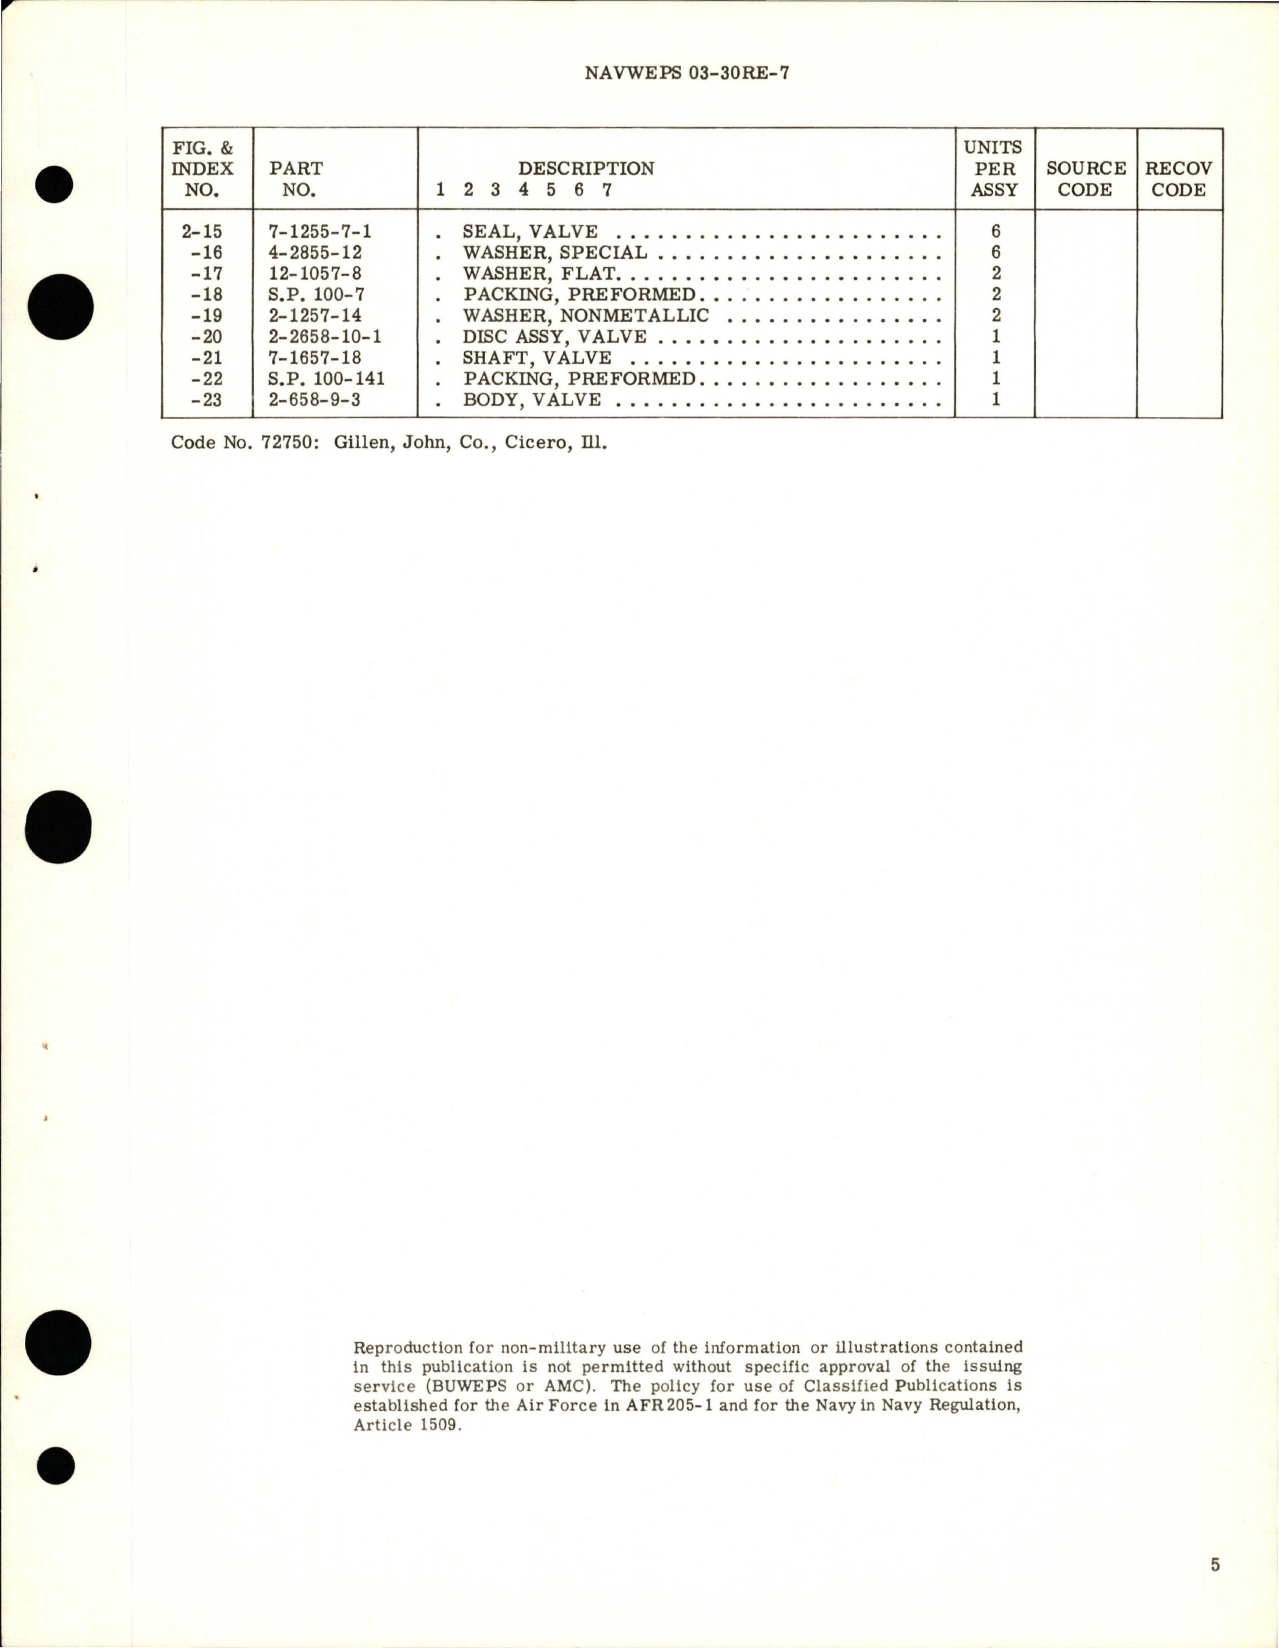 Sample page 5 from AirCorps Library document: Overhaul Instructions with Parts Breakdown for LO-TORQ Valve - Part 2-458-4